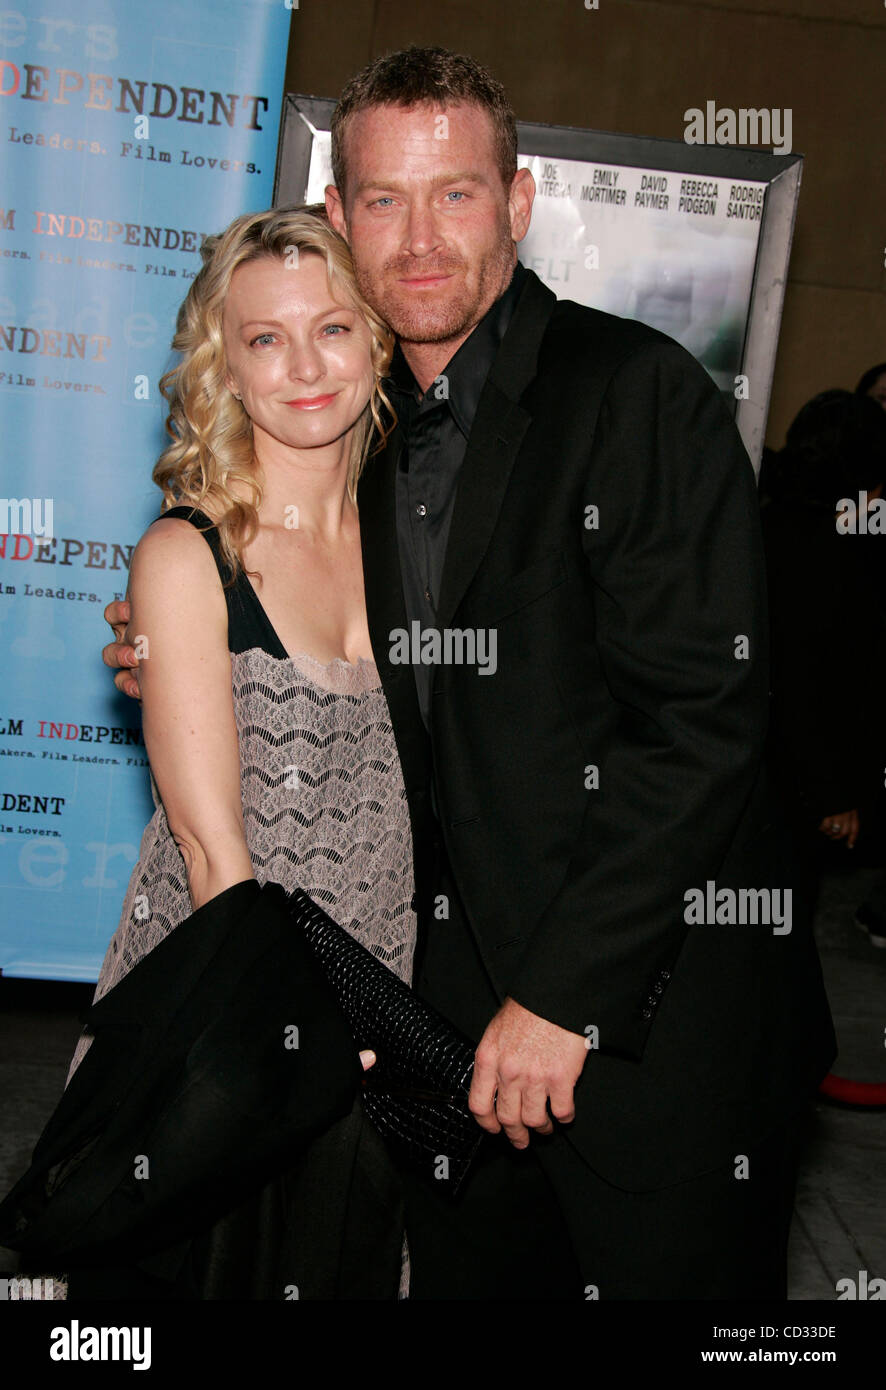 Apr 7, 2008 - Hollywood, California, USA - Actor MAX MARTINI & wife KIM RESTELL arriving at the 'Redbelt' Los Angeles Screening at the Egyptian Theatre. (Credit Image: © Lisa O'Connor/ZUMA Press) Stock Photo